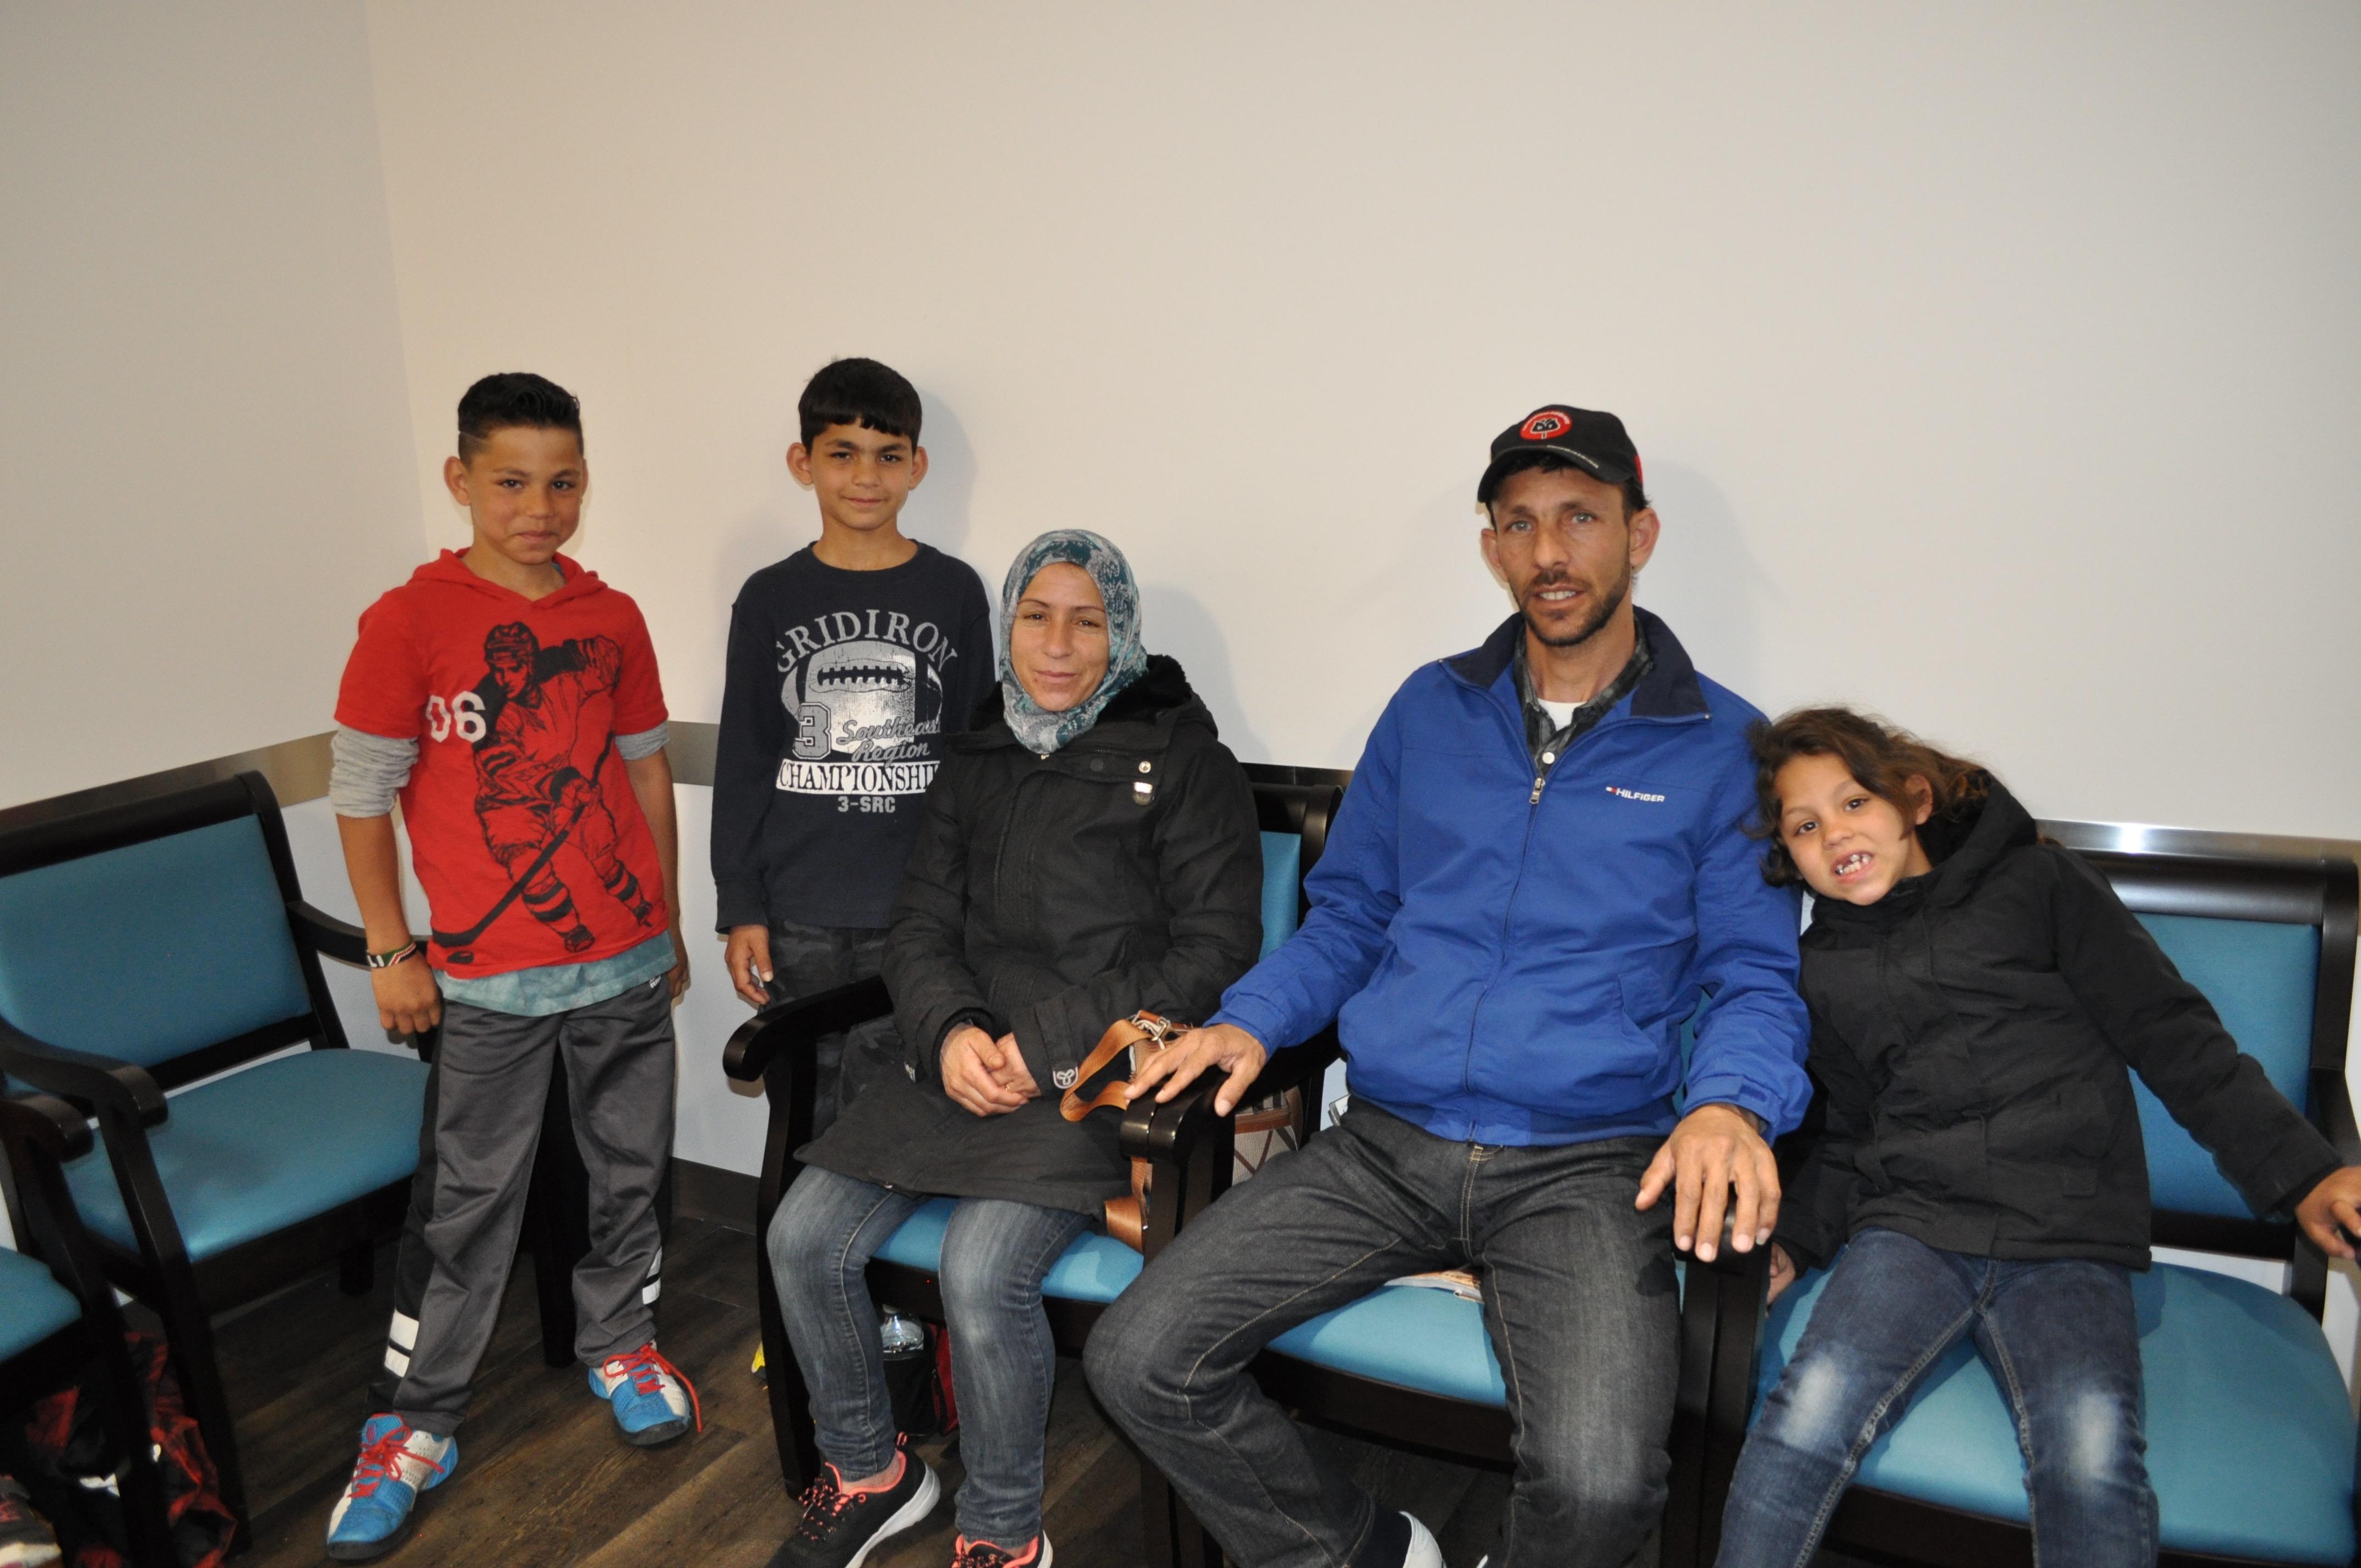 Members of the Malak family, Syrian immigrants who came to Canada in 2015 after three years in a refugee camp